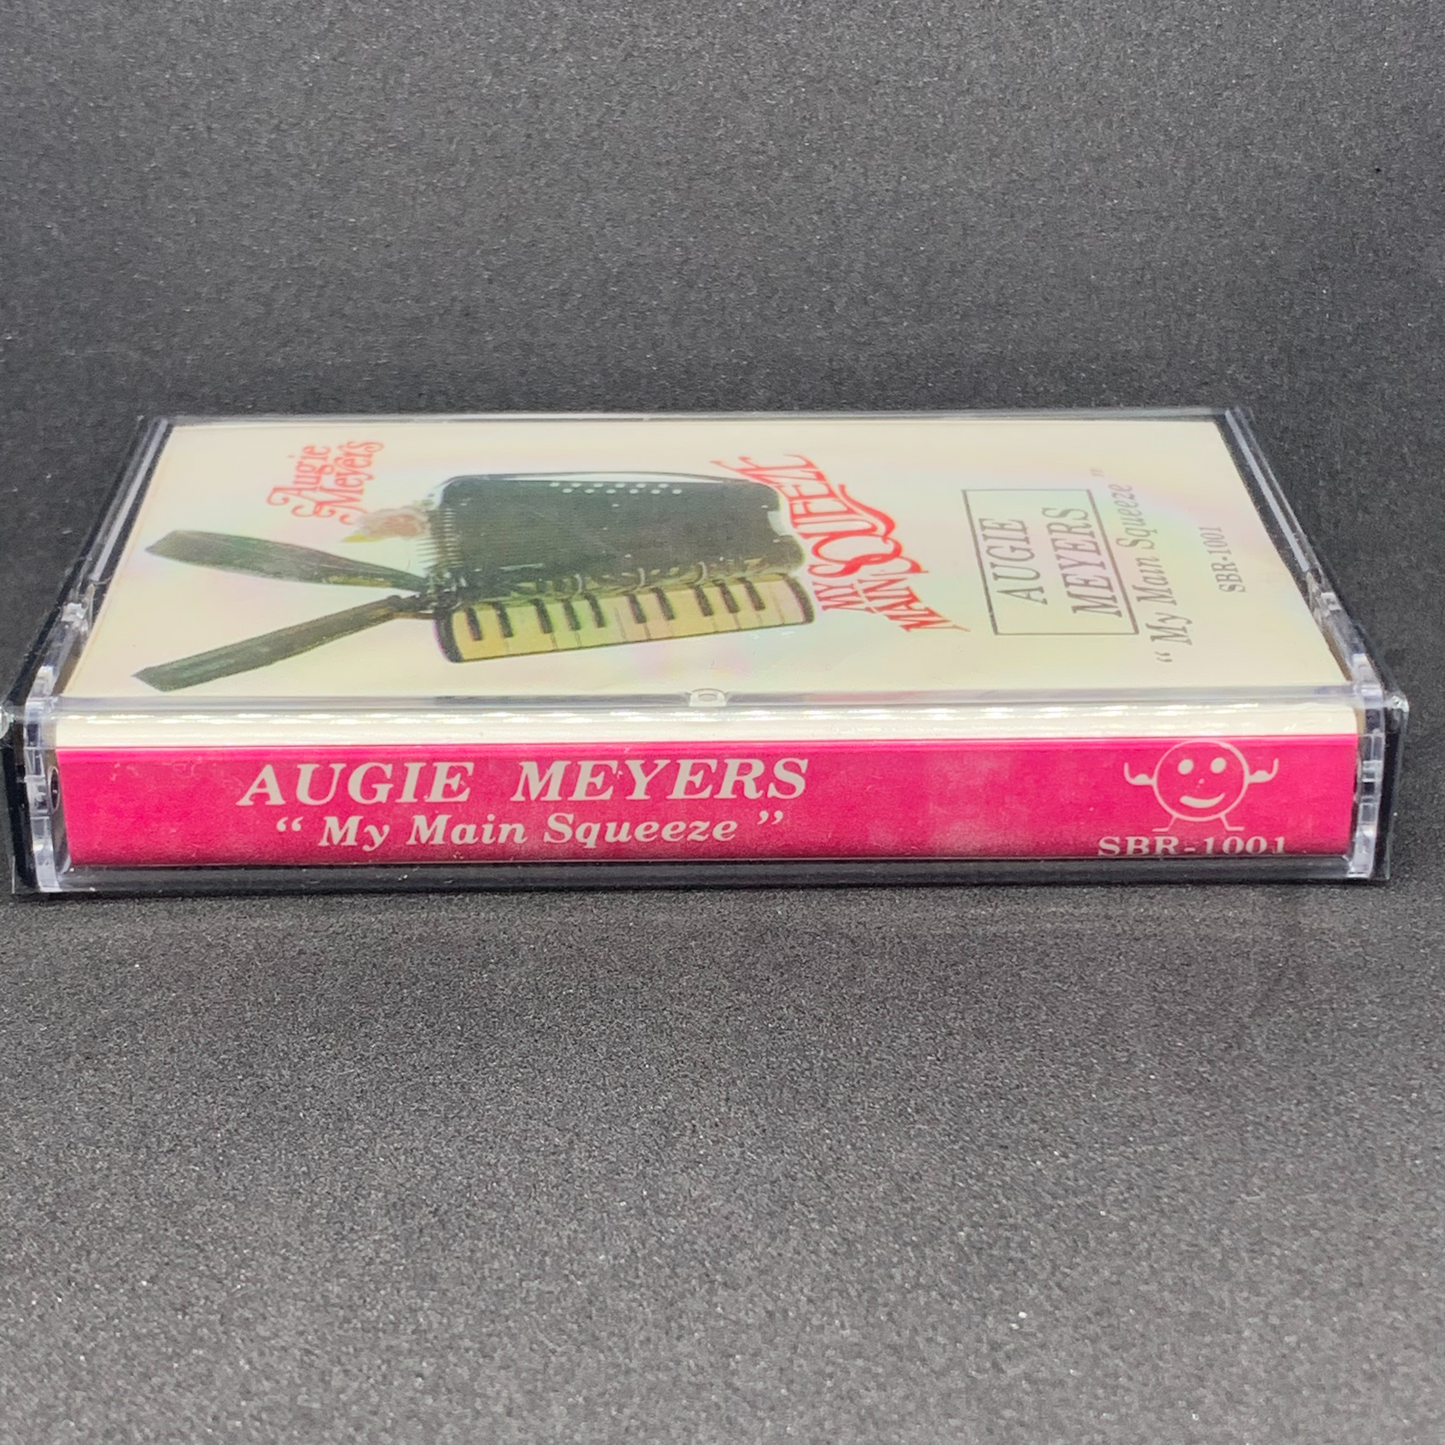 Augie Meyers - My Main Squeeze (Cassette)